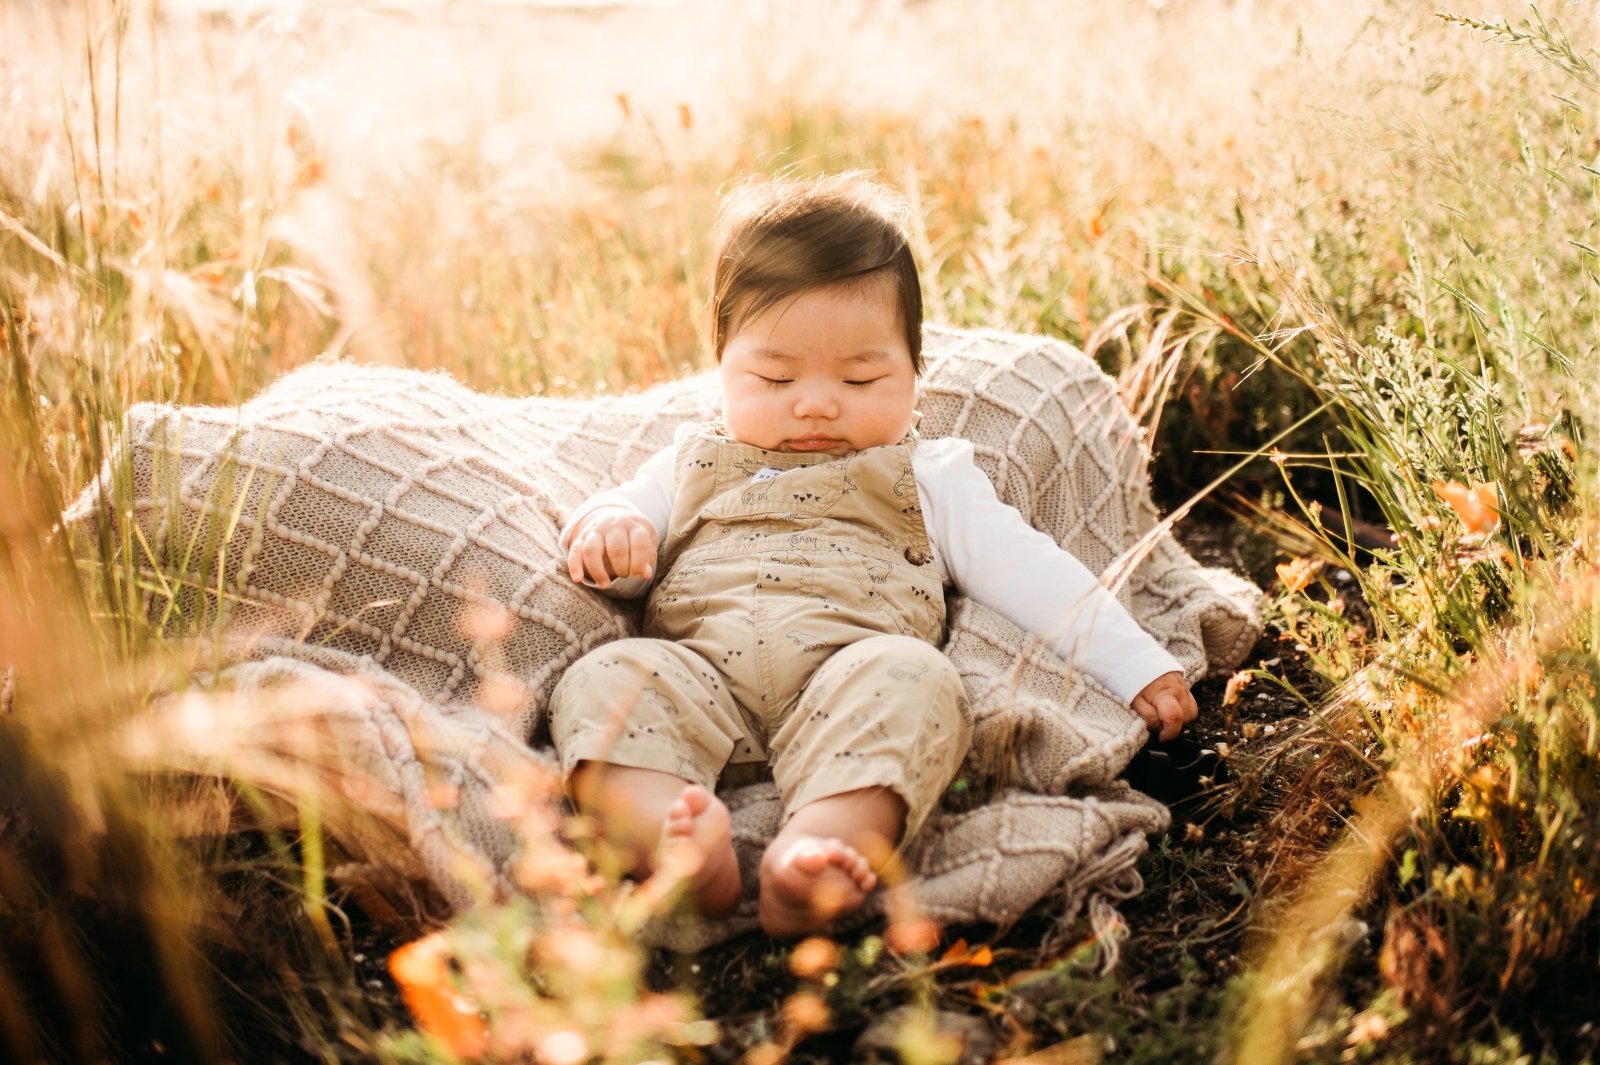 EAST BAY AREA FAMILY PHOTOGRAPHY SHELL RIDGE OPEN SPACE BABY LIFESTYLE PHOTOSHOOT  21.jpg